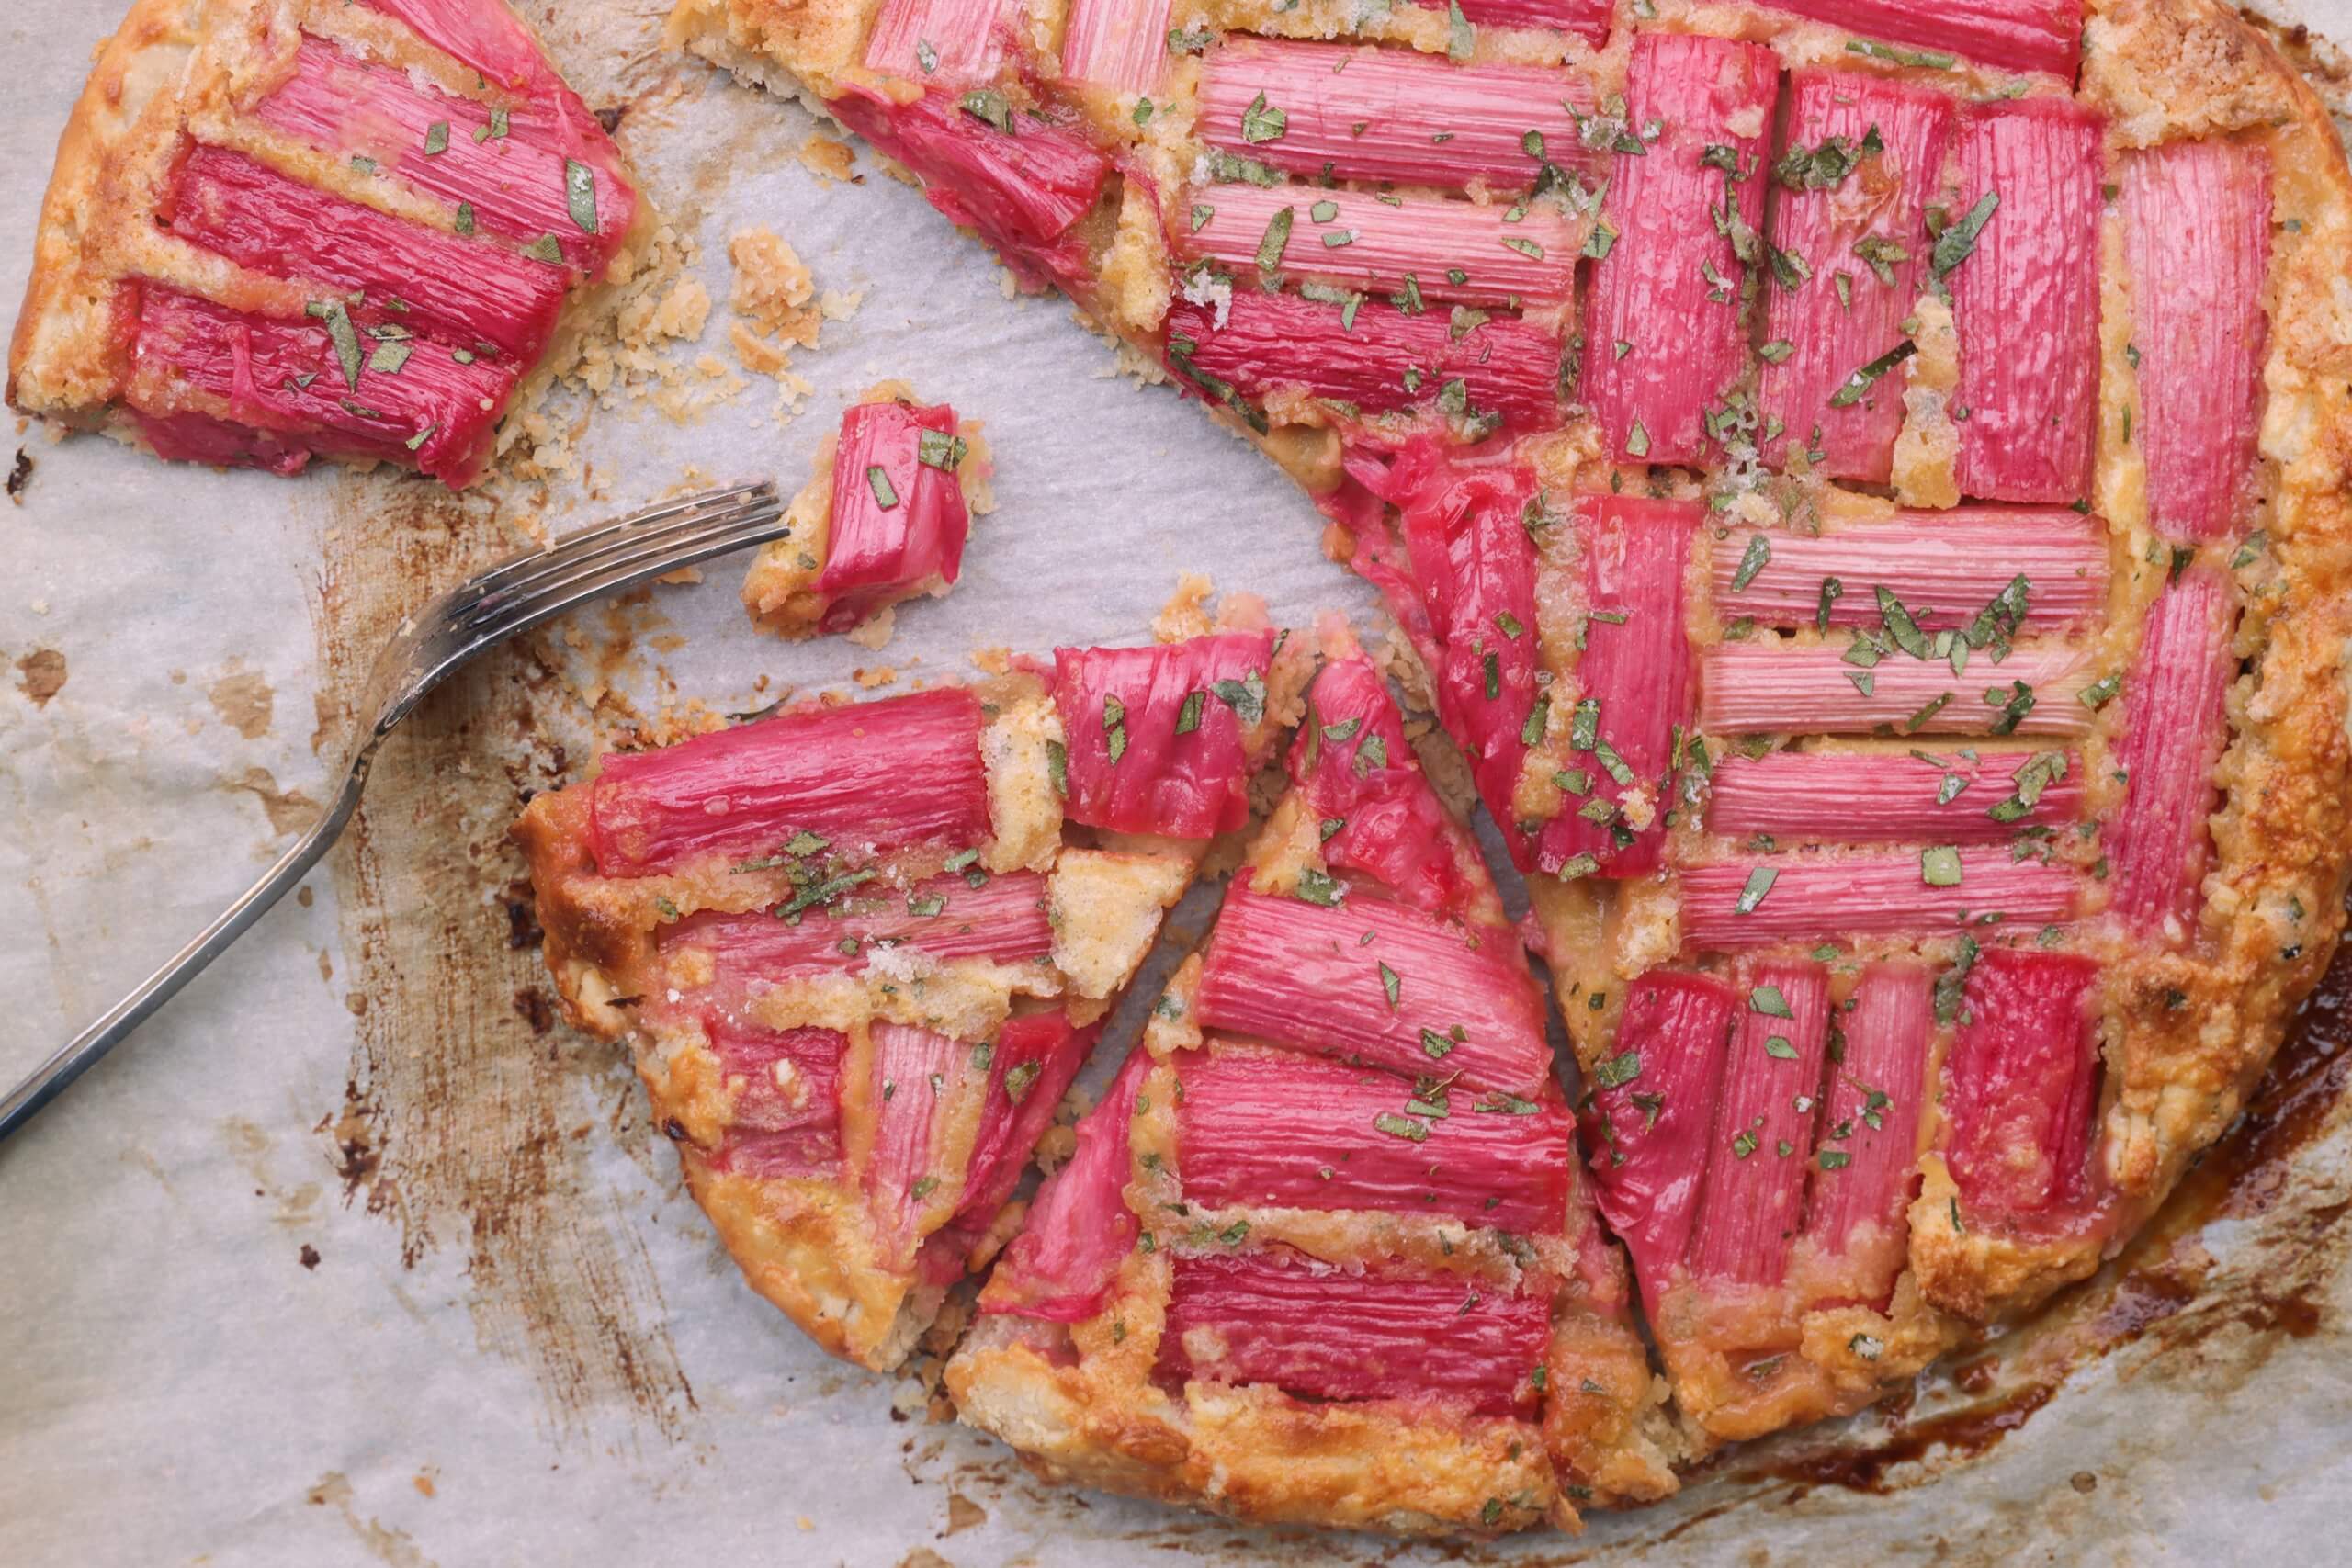 A galette with pieces of rhubarb on top, sliced into pieces with a fork visible.